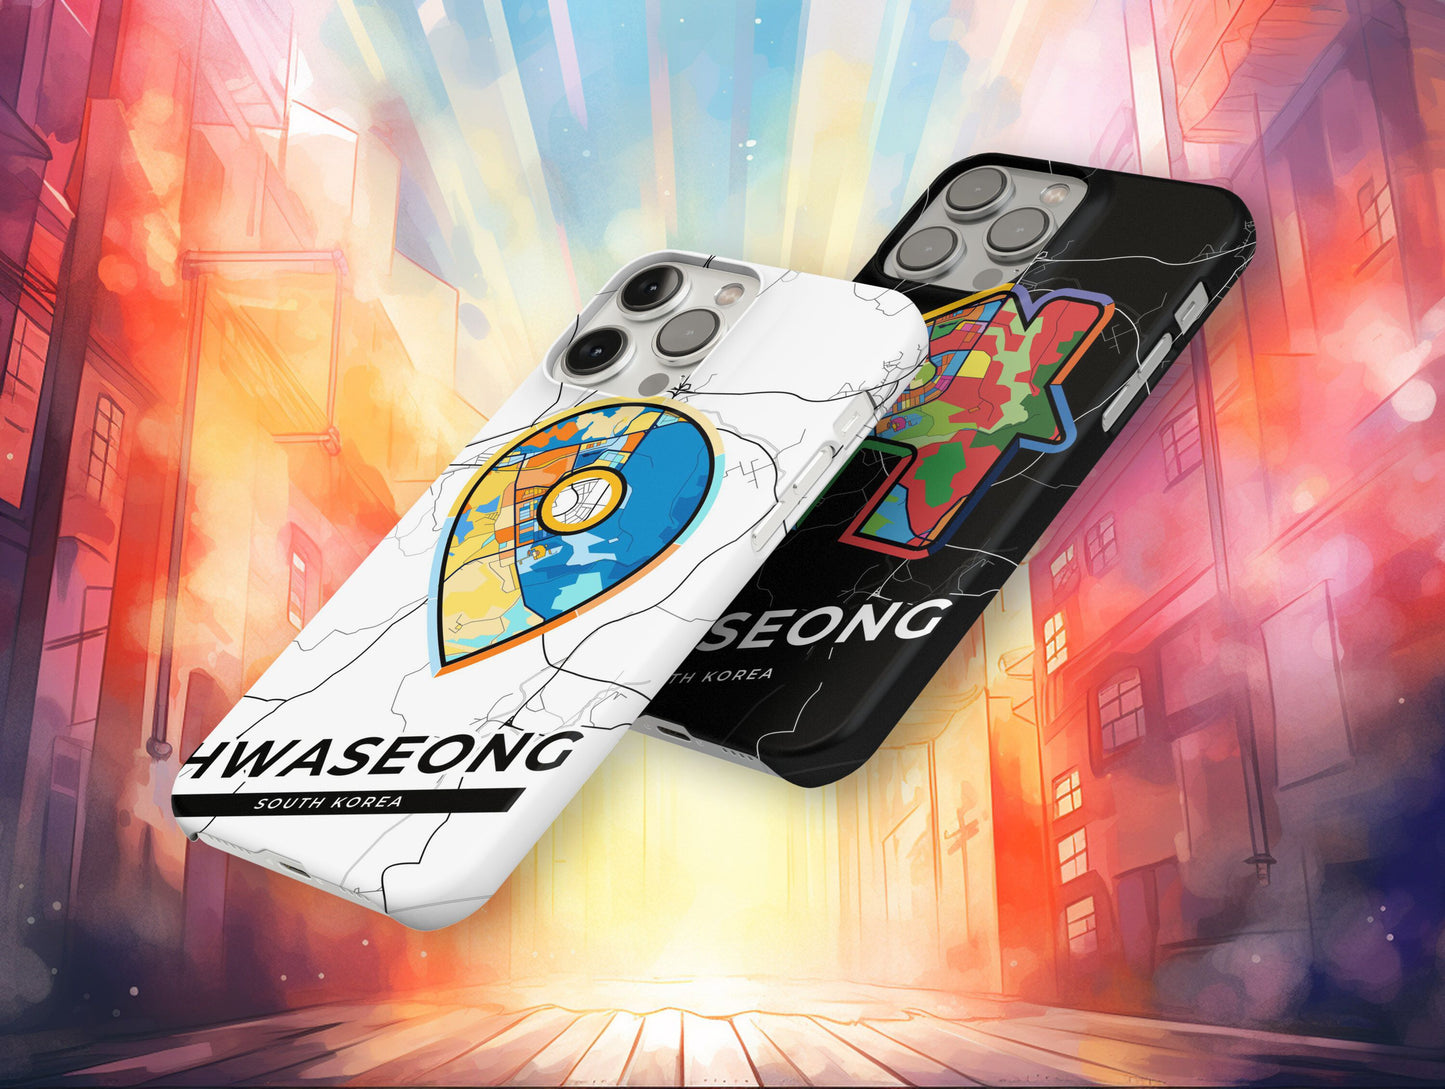 Hwaseong South Korea slim phone case with colorful icon. Birthday, wedding or housewarming gift. Couple match cases.